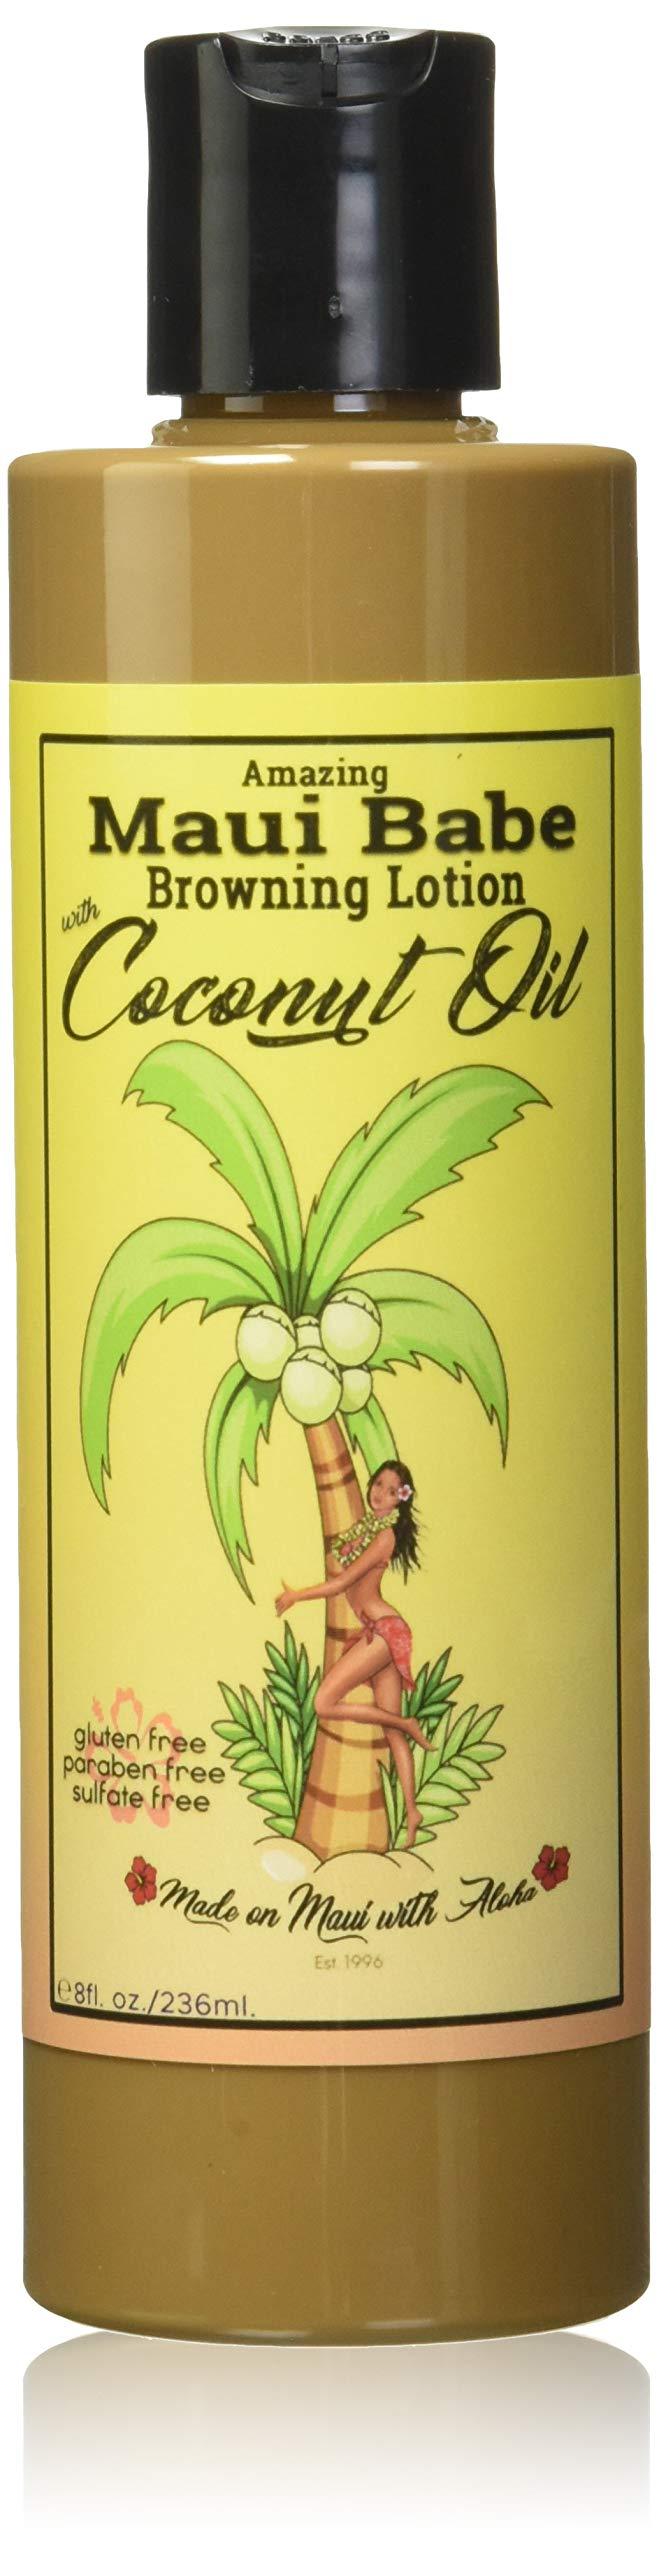 Maui Babe Browning Lotion with Coconut Oil 8oz (236ml) - BeesActive Australia